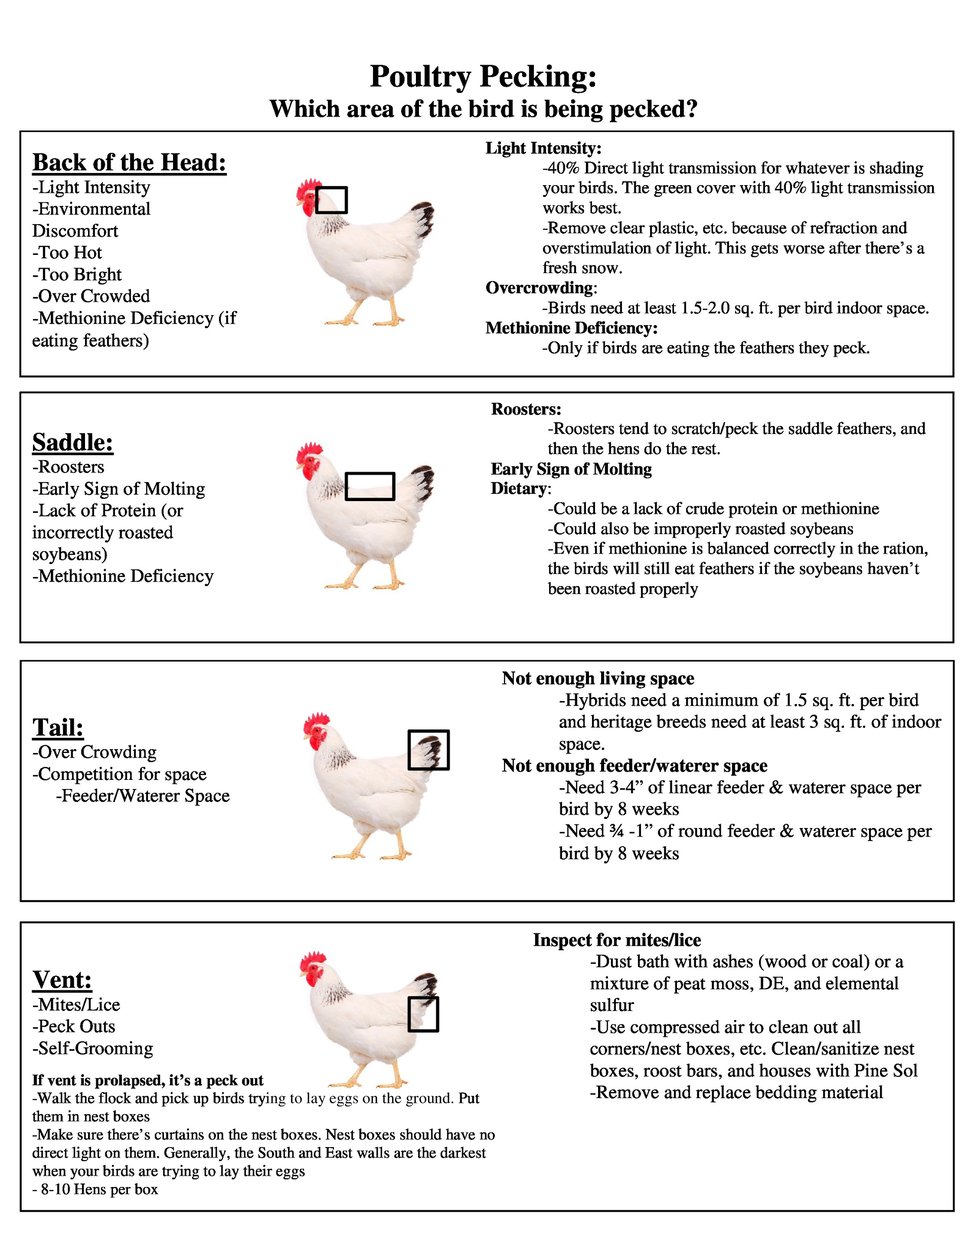 Poultry Pecking Chart- Head, Saddle, Vent, and Tail Pecking causes and solutions